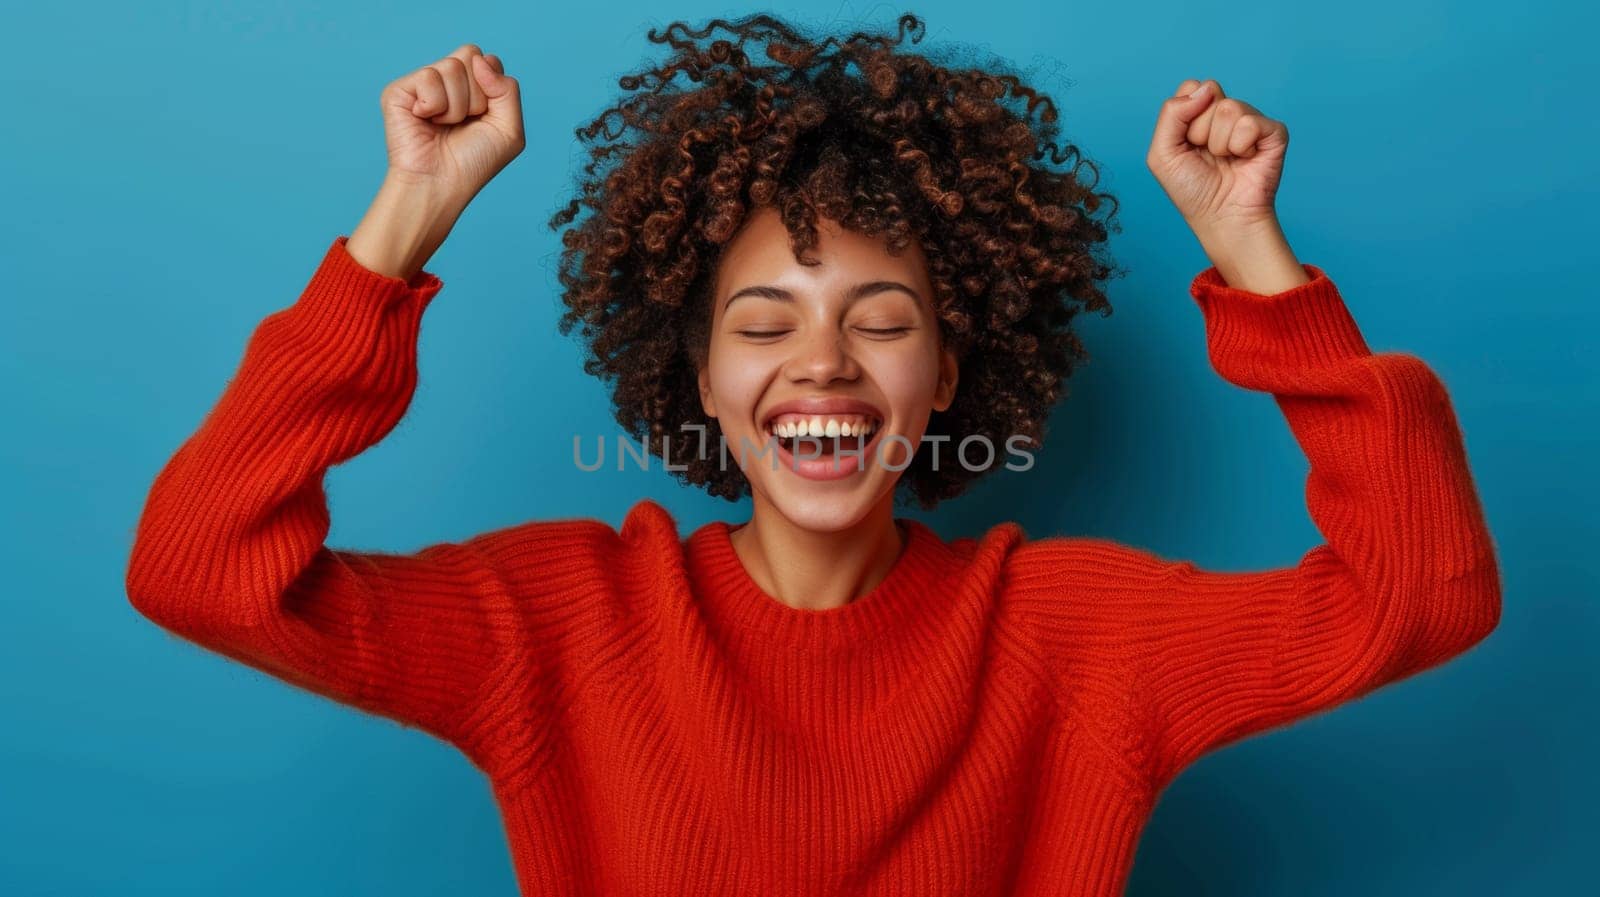 A woman in a red sweater celebrating with her hands up